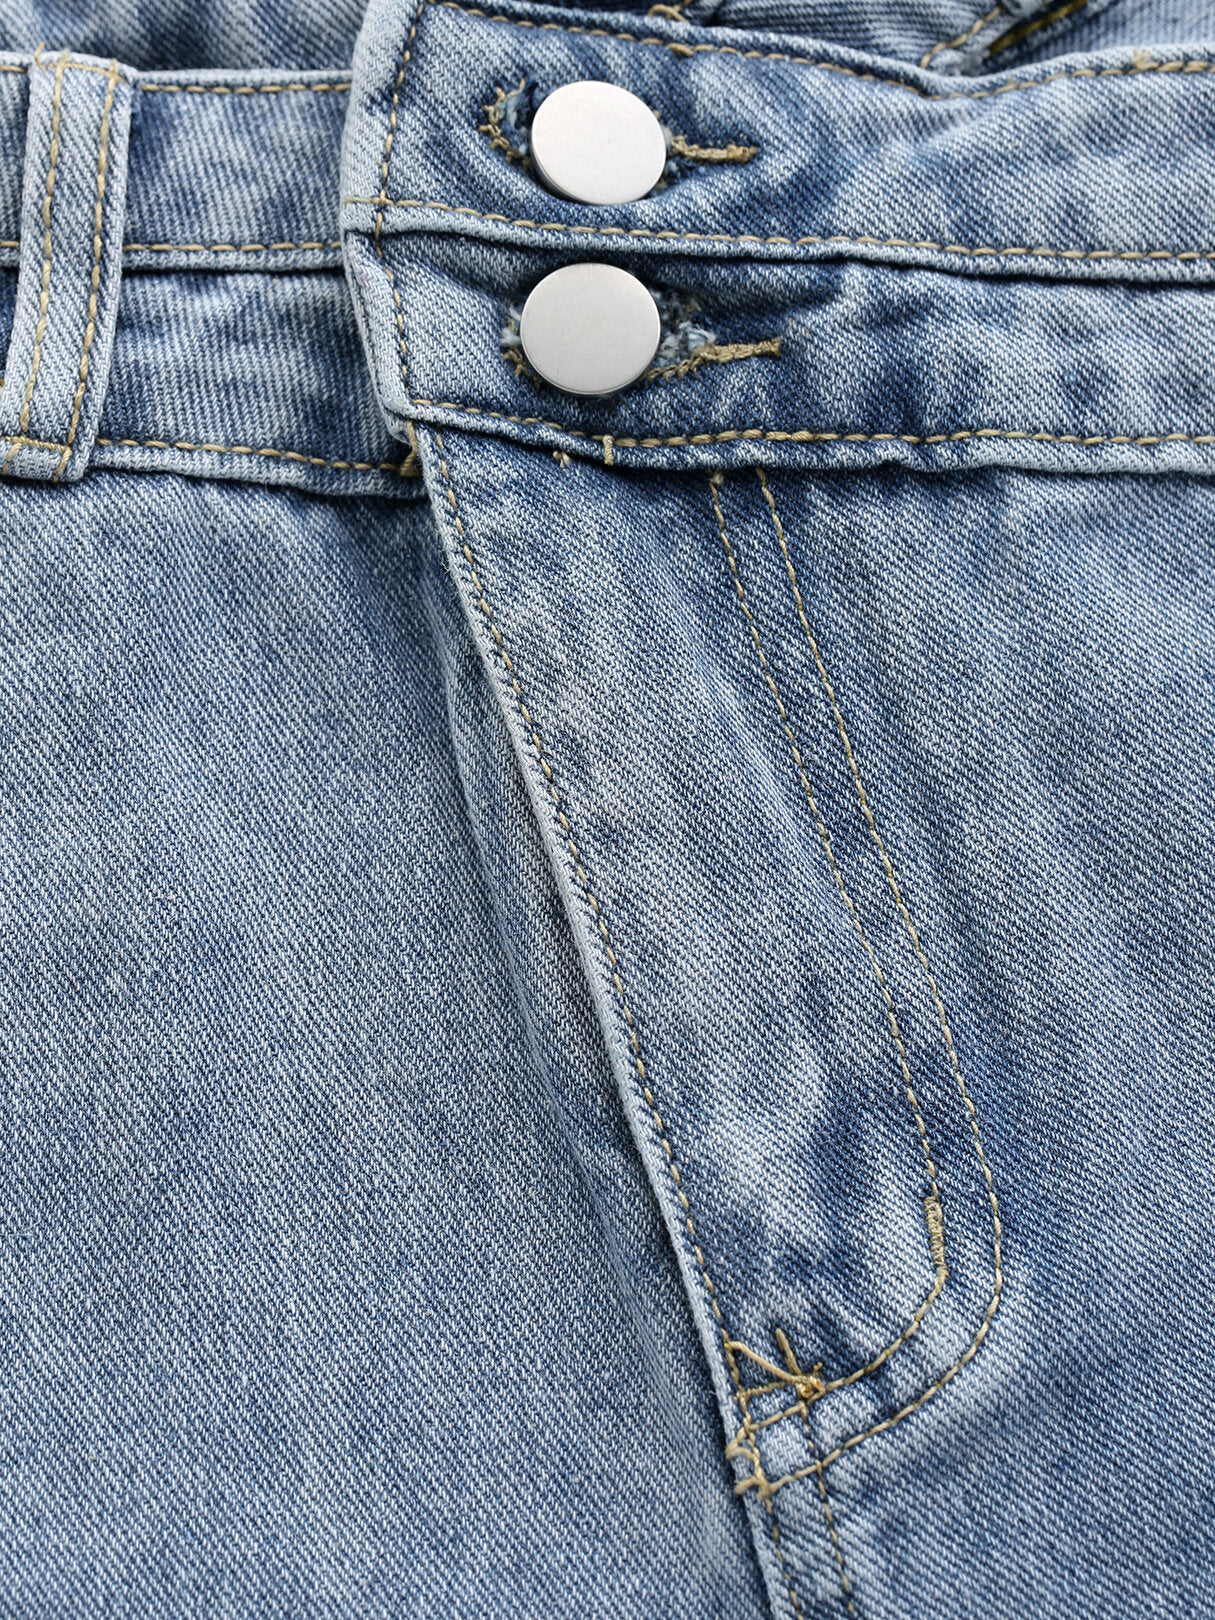 Solid Hollow-out Button Cotton Jeans